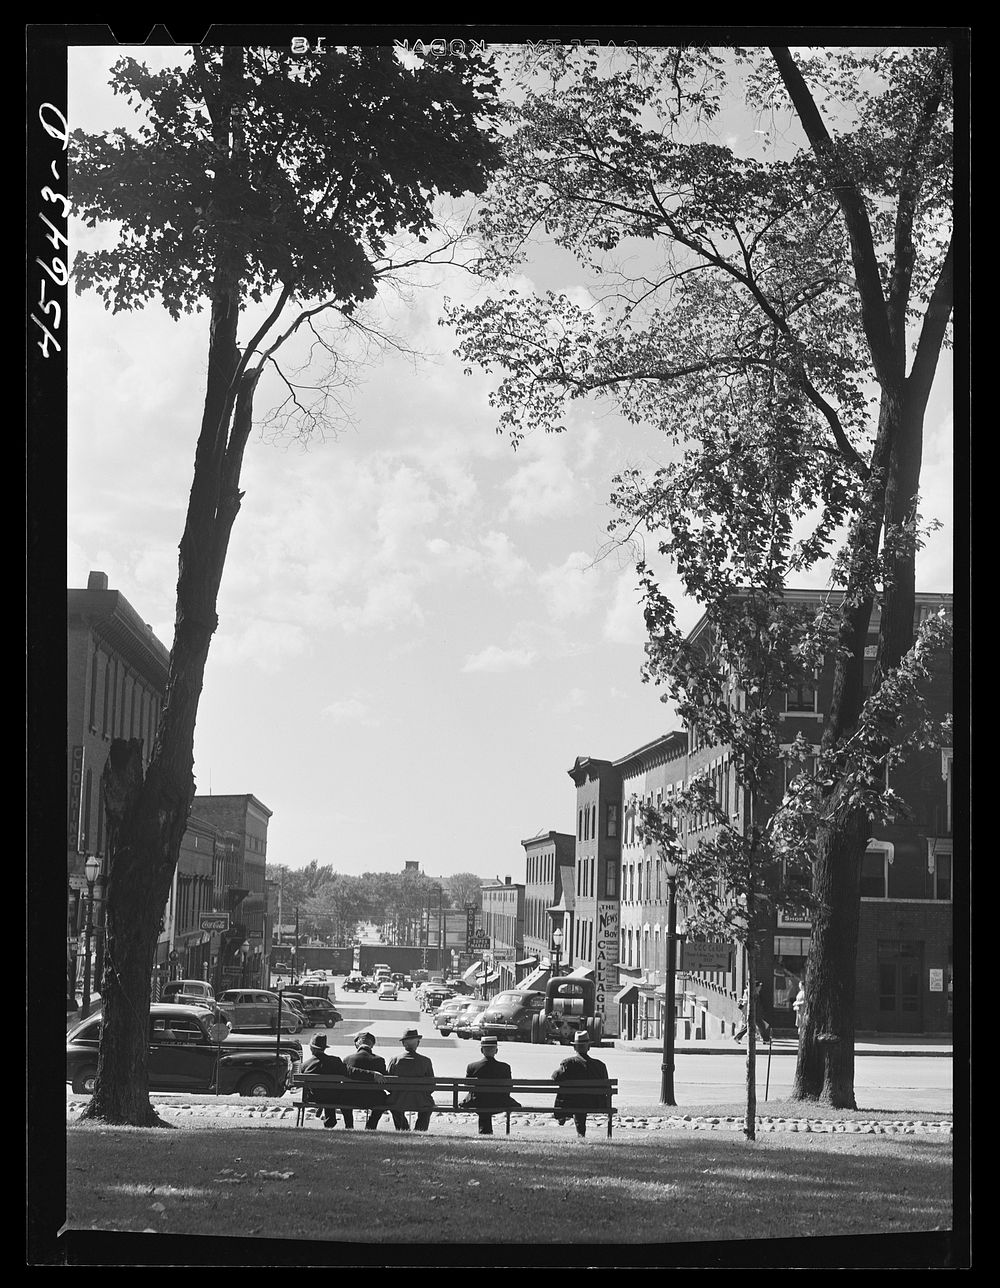 [Untitled photo, possibly related to: In the square, facing the main street in Saint Albans, Vermont]. Sourced from the…